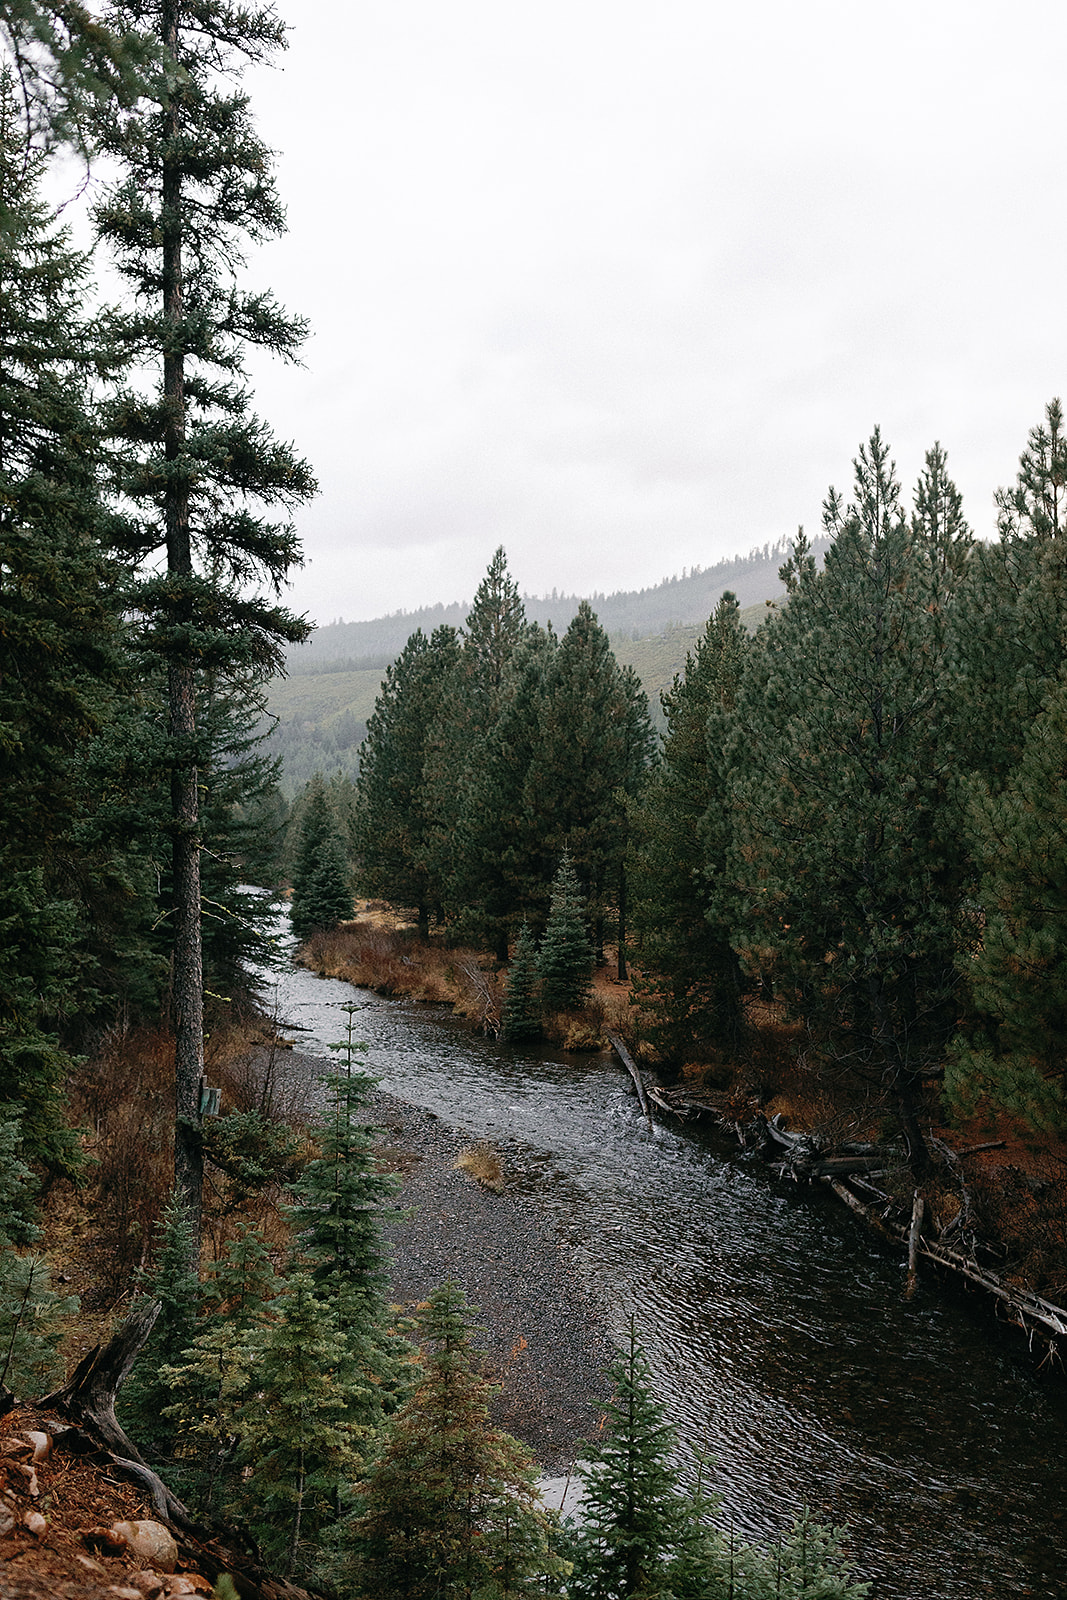 A view of the river above Skyliner Lodge in Bend Oregon with trees surrounding the water